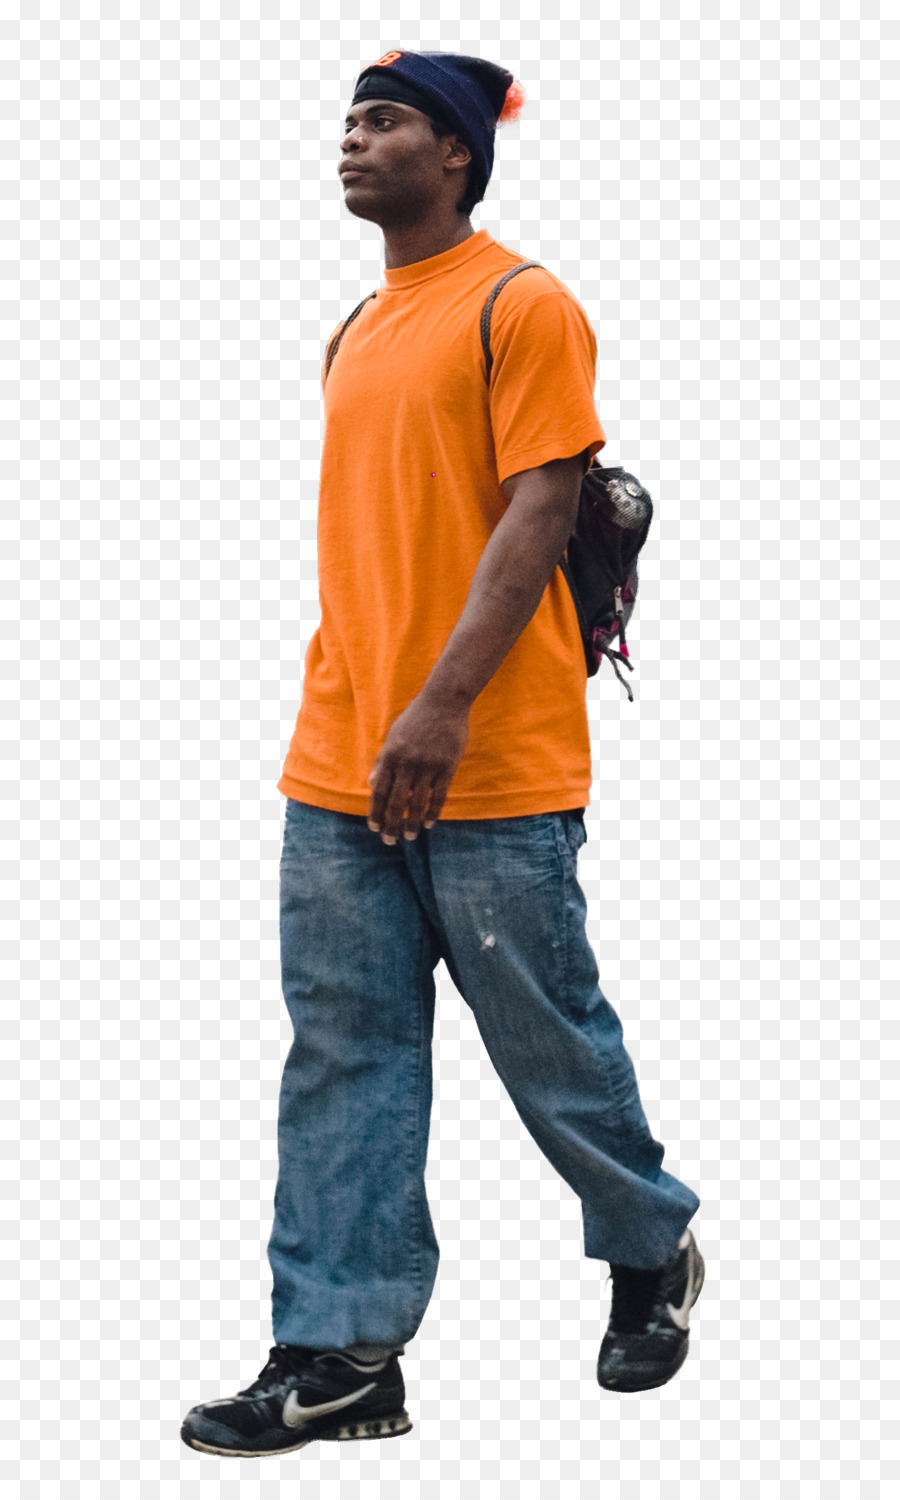 Backpack Jeans African American Human back Side 2 Side - African american people png download - 630*1500 - Free Transparent Backpack png Download.